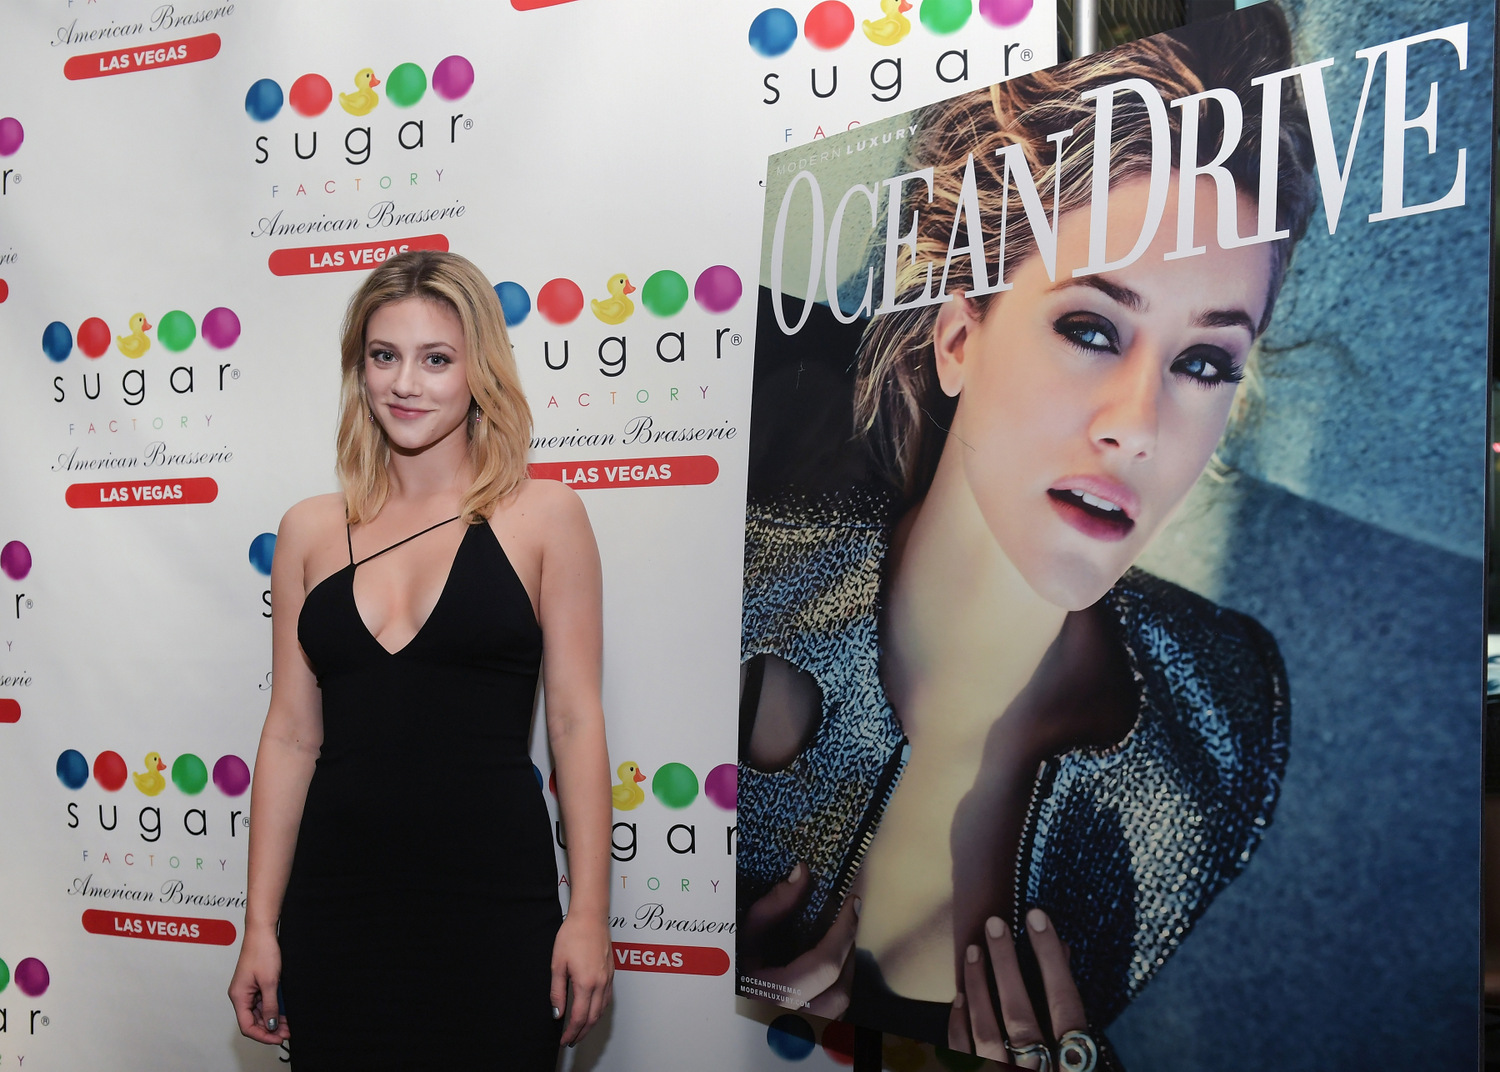 Ocean Drive Magazine Met Sin City to Celebrate February Issue with Lili Reinhart at Sugar Factory Las Vegas